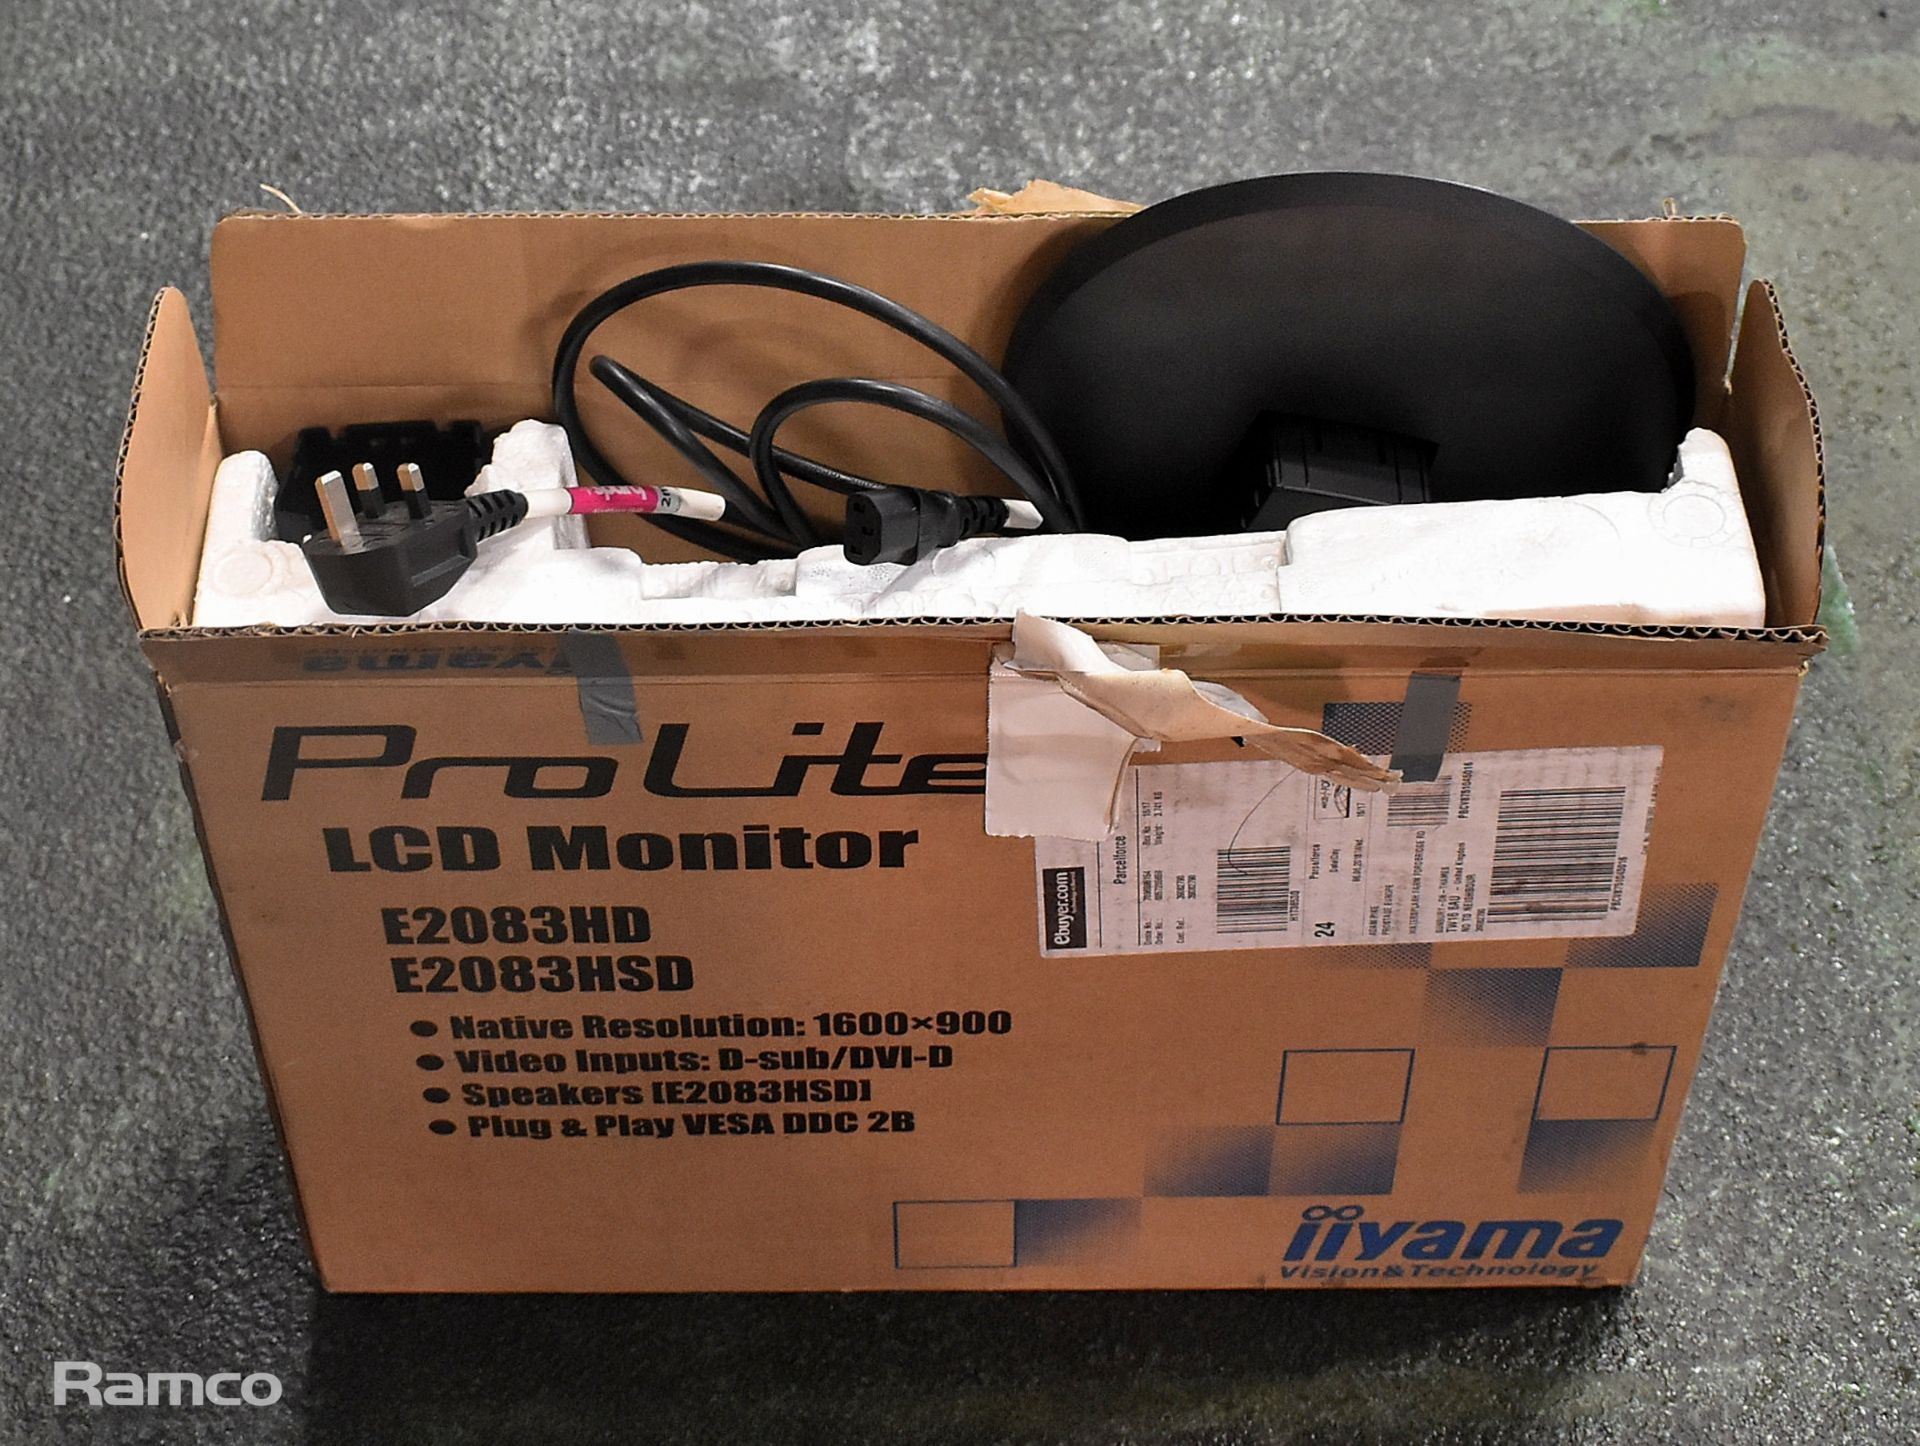 IIyama ProLite E2083HSD 20" monitor with 1600x900 resolution, in box with stand and plug - Image 6 of 6